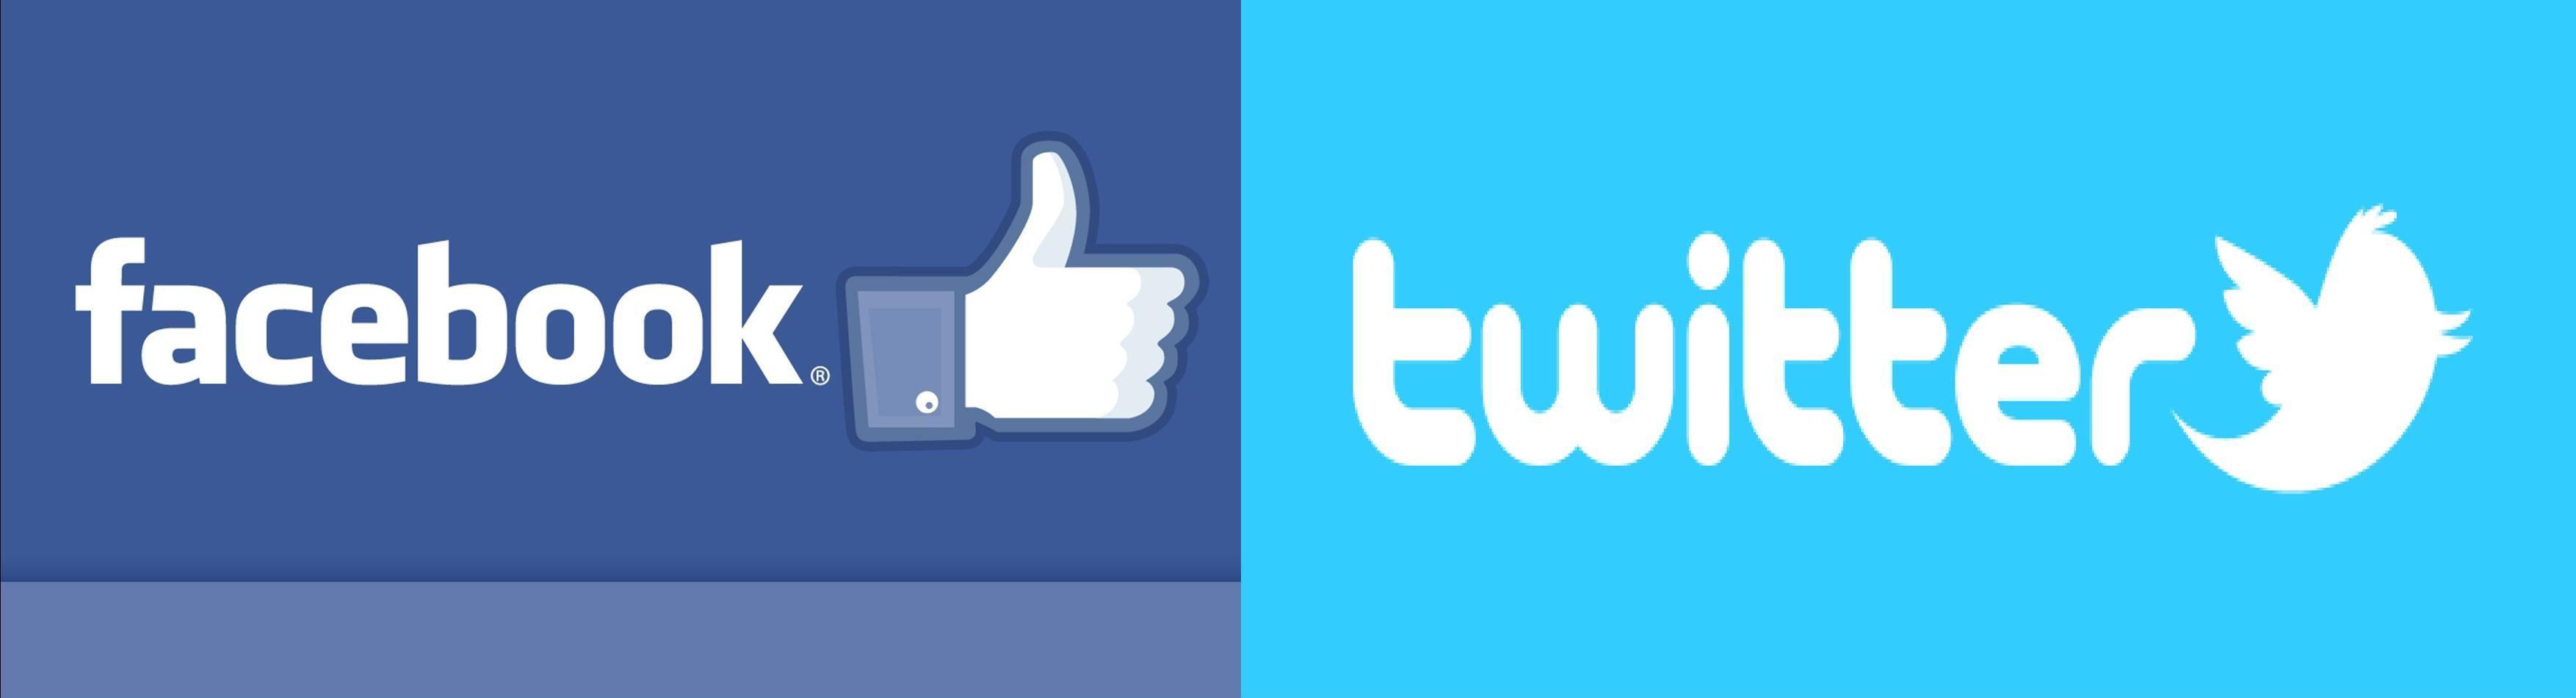 Facebook Twitter Logo - Facebook-and-twitter-logo ashes scattering - Scattering Ashes